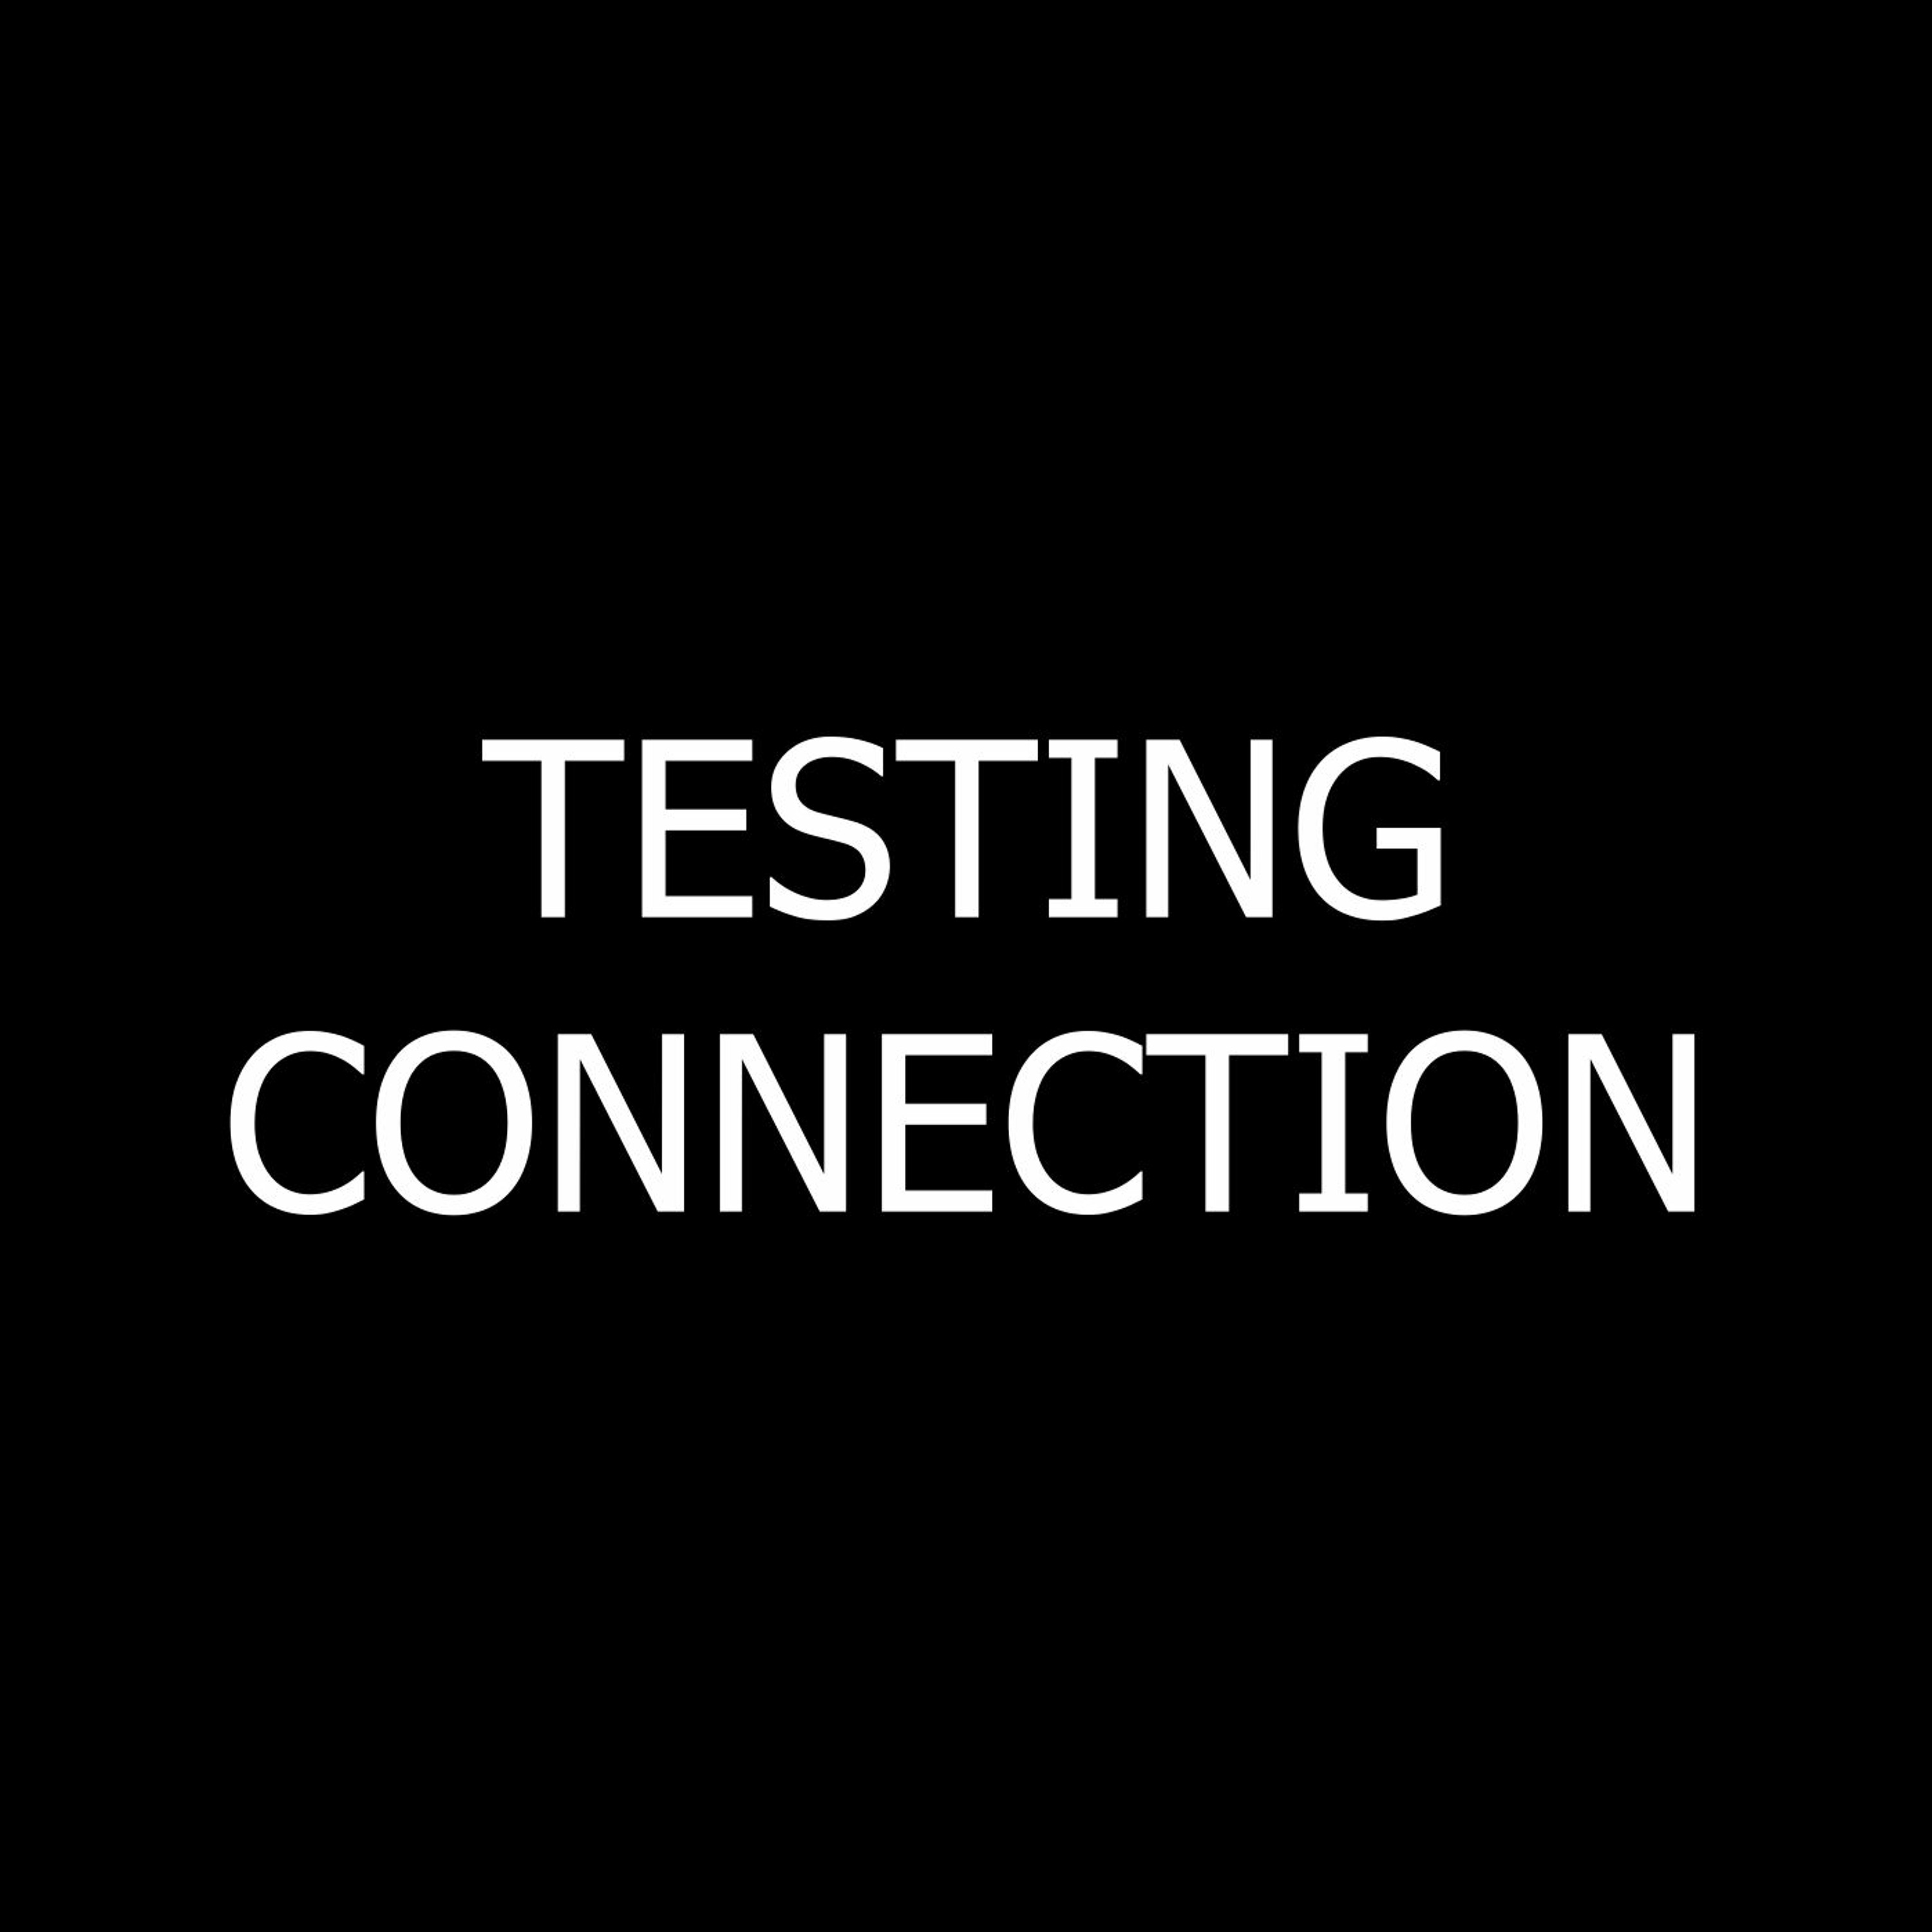 Testing Connection - 03